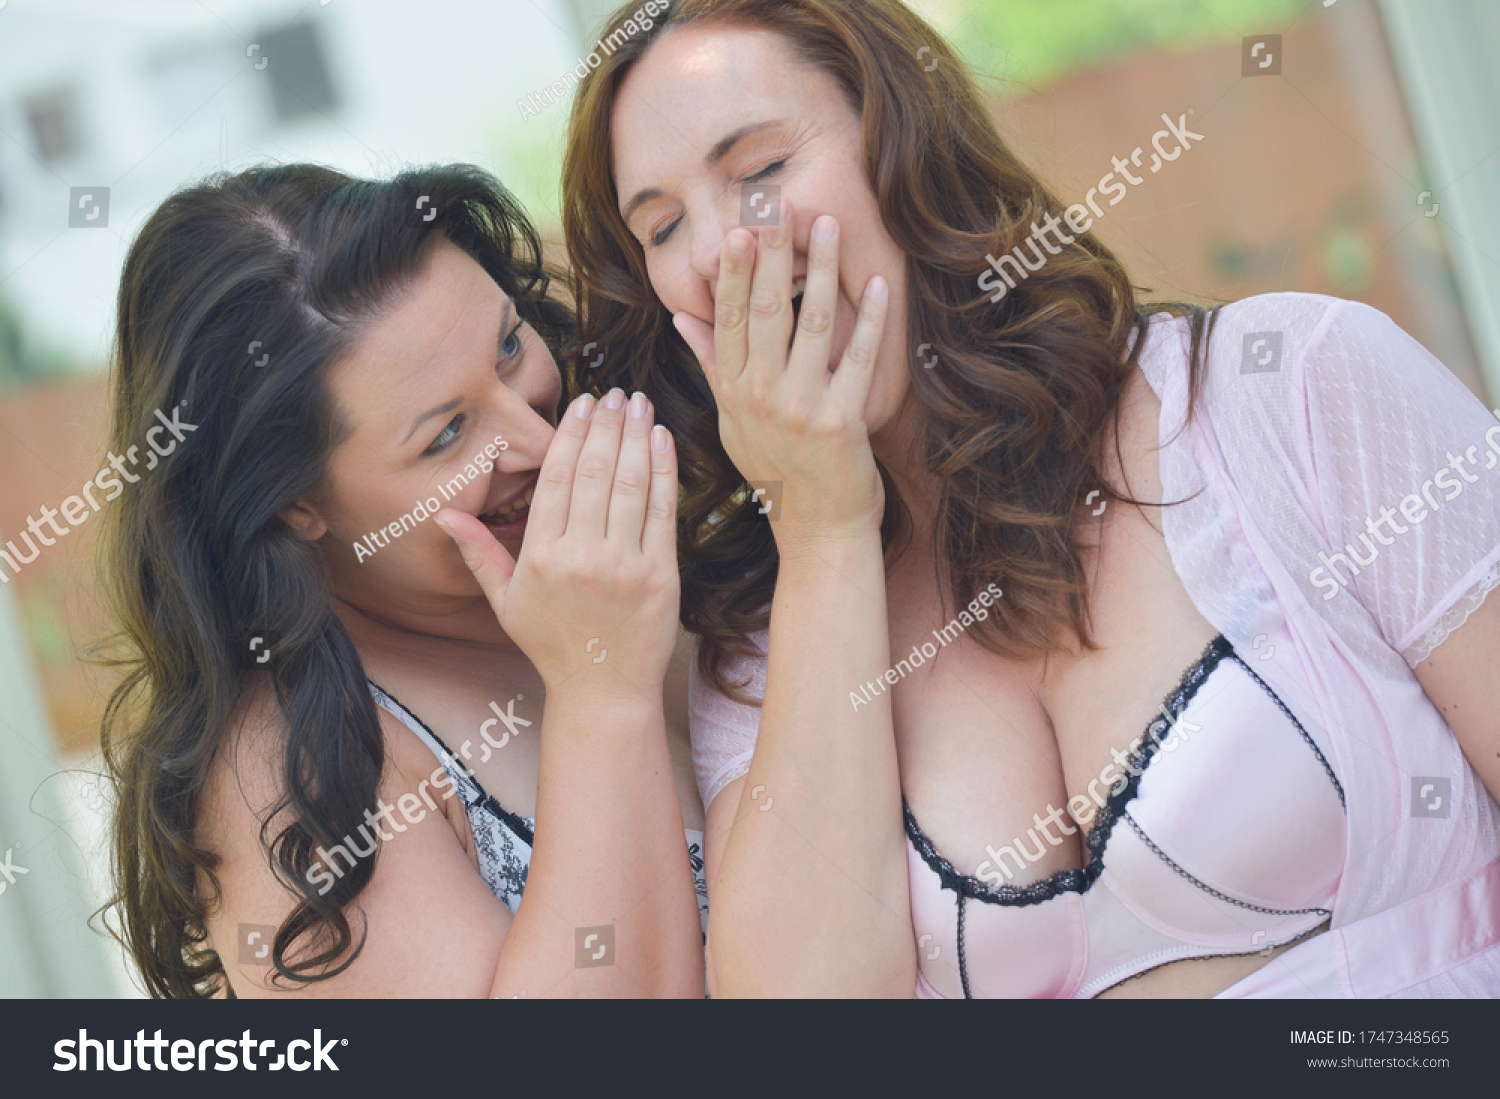 stock-photo-mid-adult-women-in-lingerie-laughing-together-1747348565.jpg